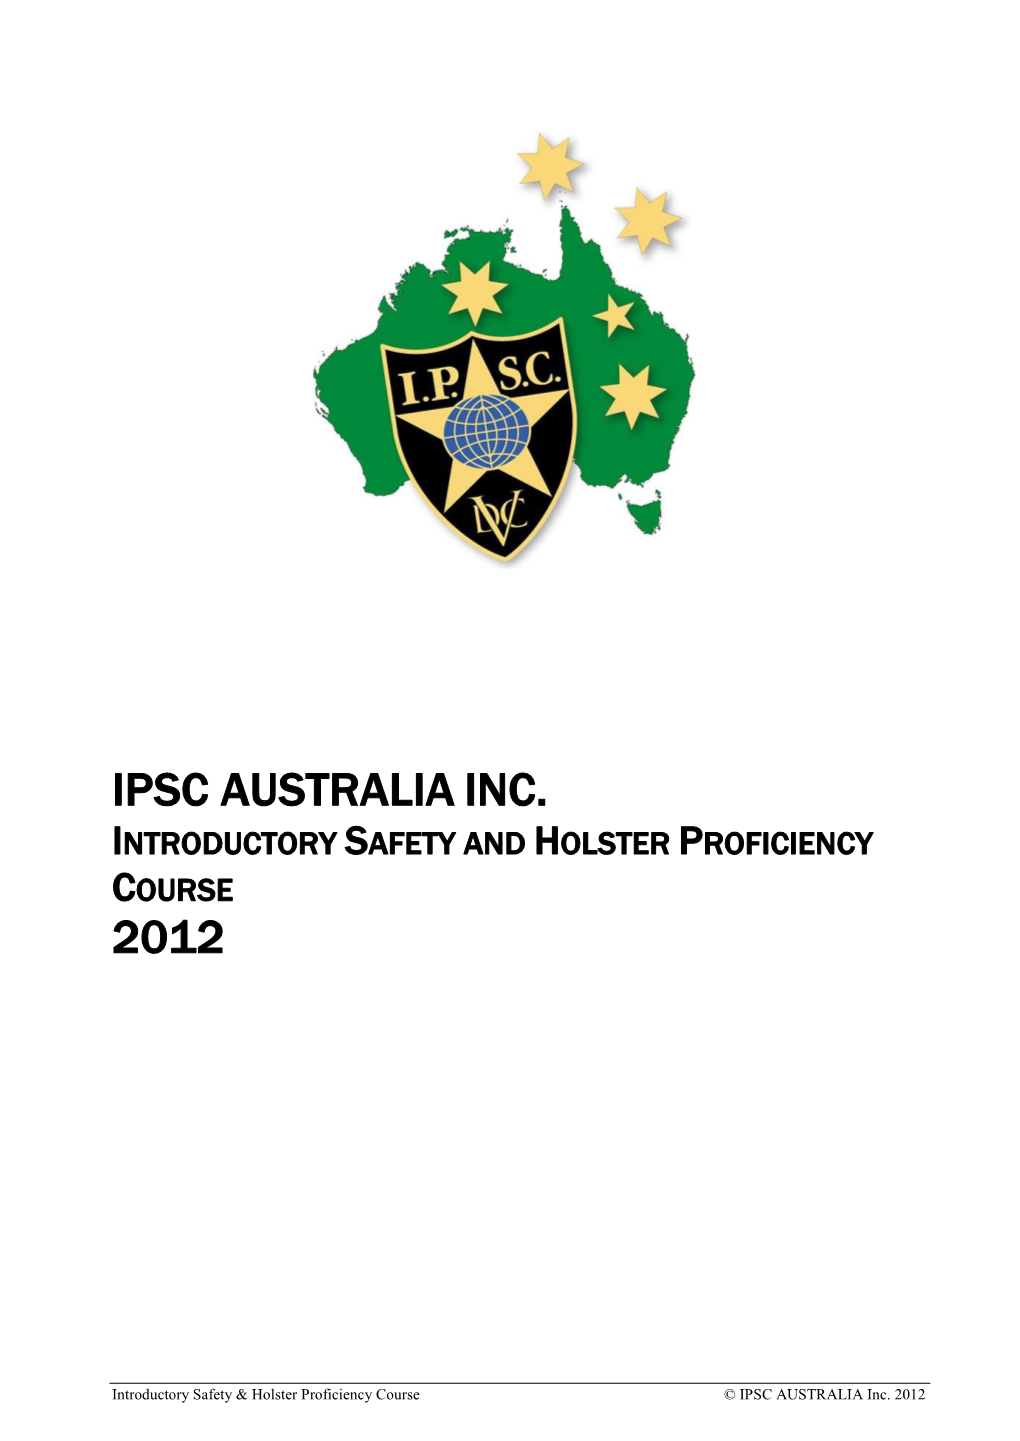 Intro Safety & Holster Profiency Manual